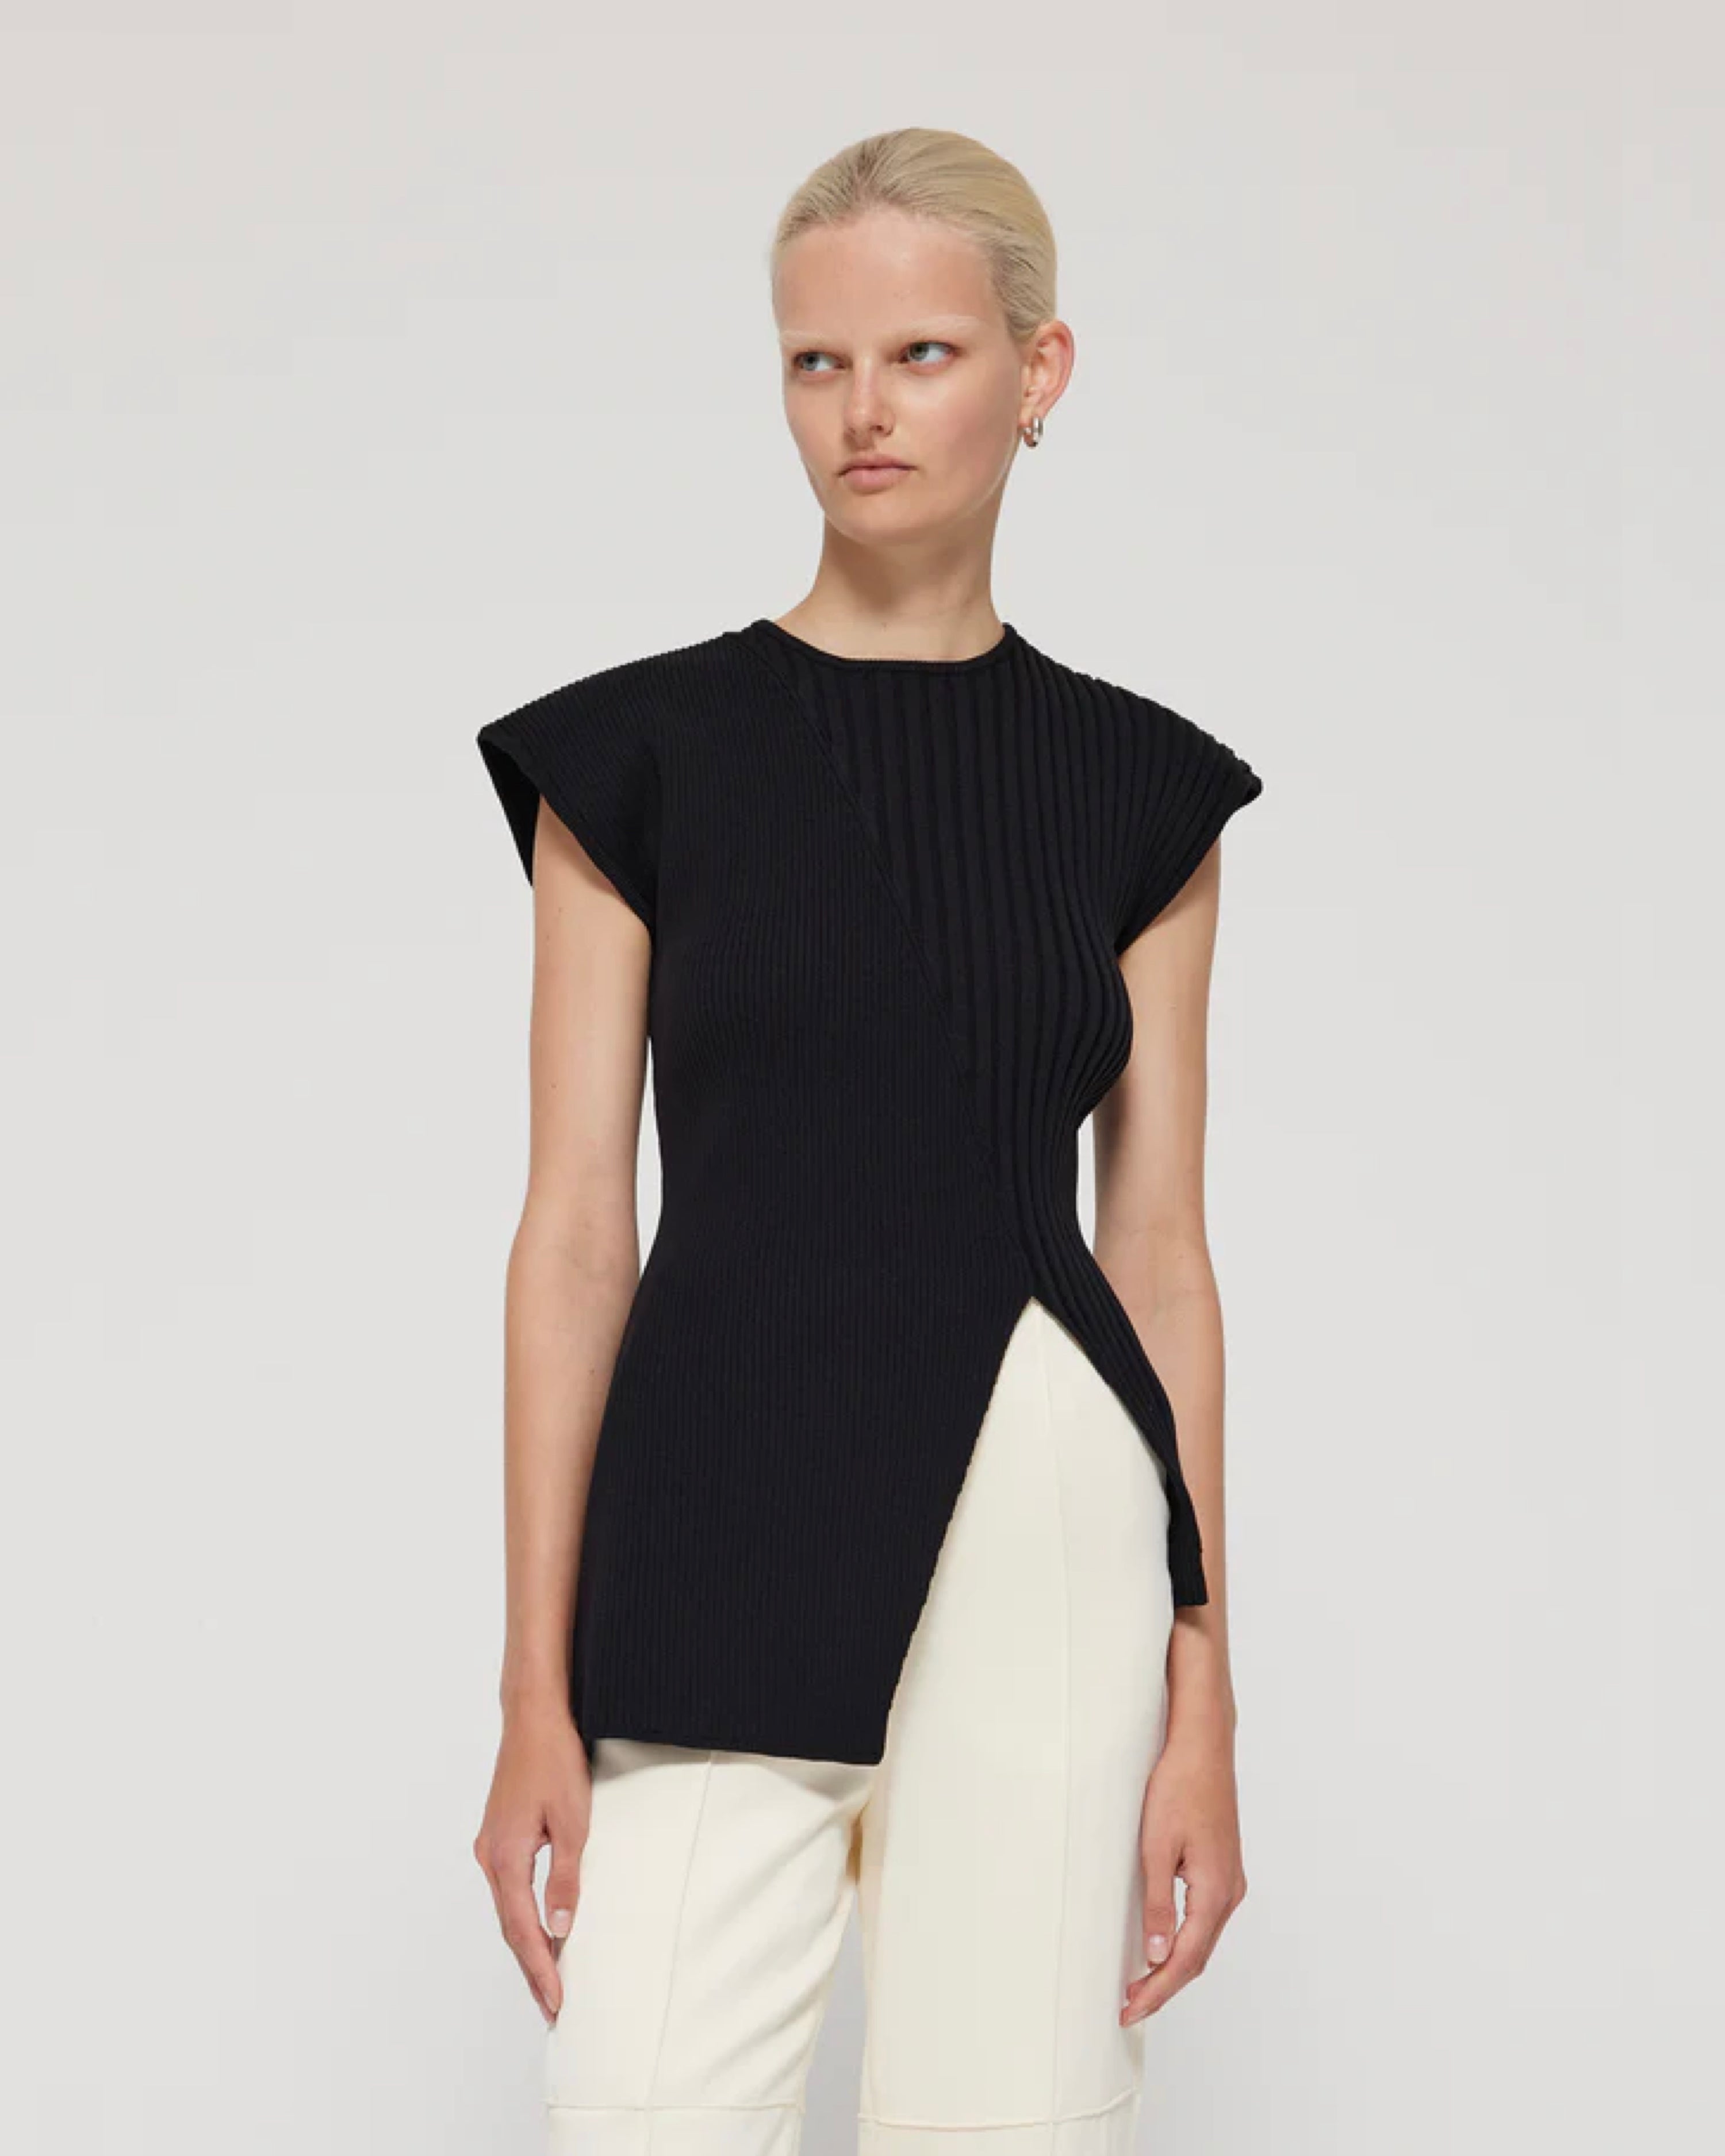 ASYMMETRIC SLEEVELESS KNITTED TOP IN BLACK